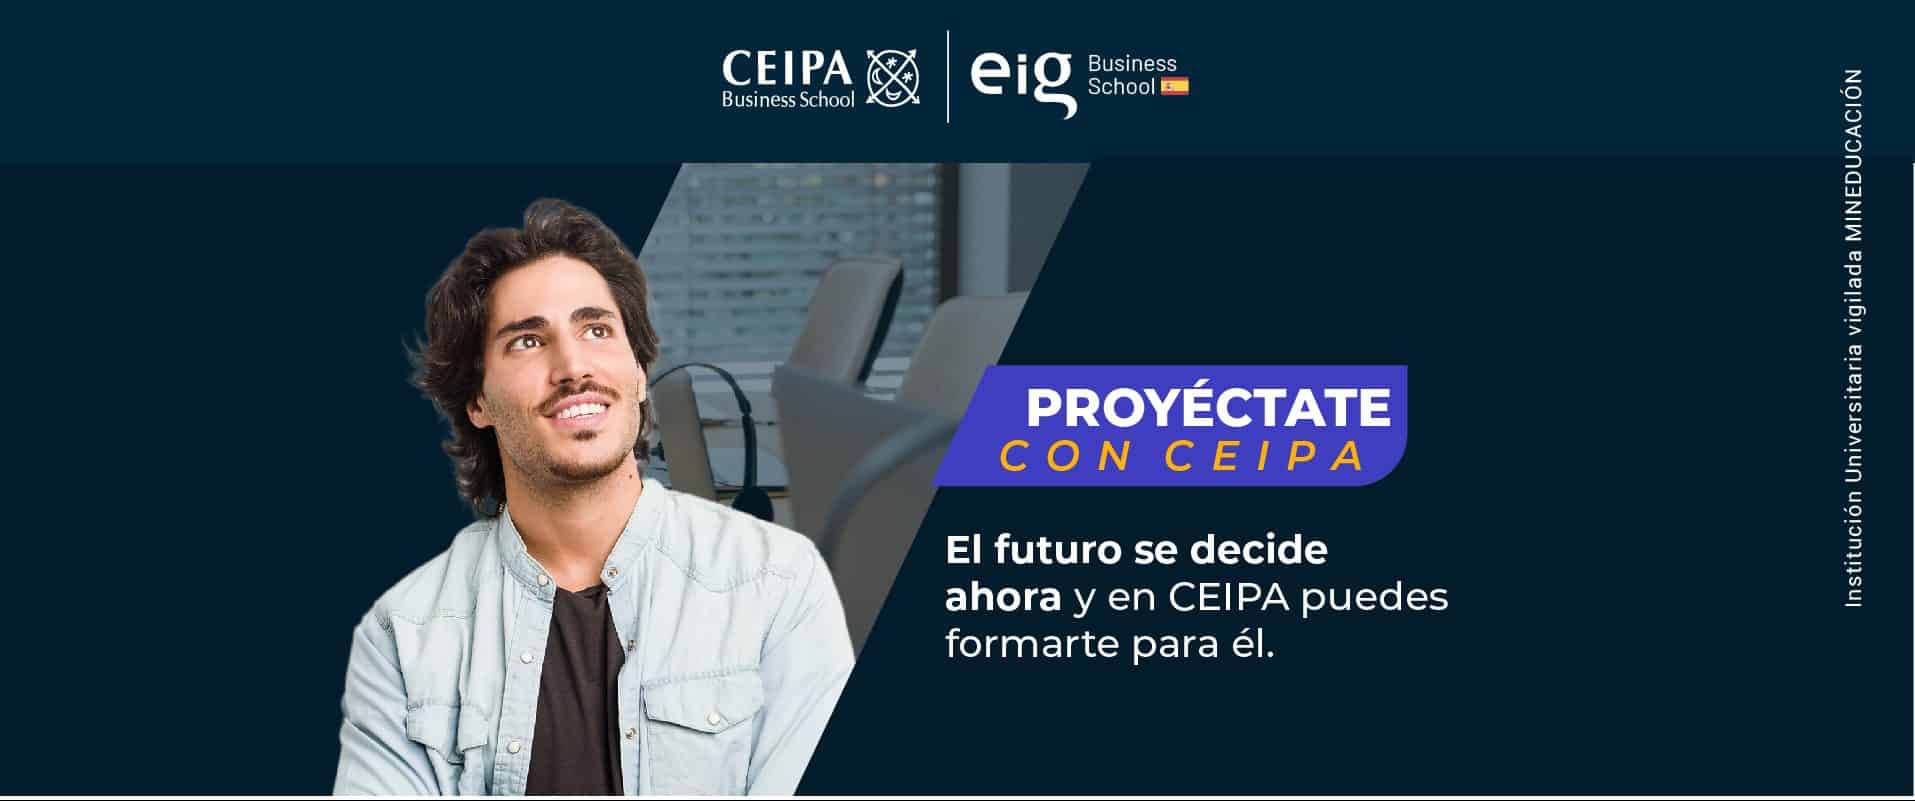 Proyectate con Ceipa Business School